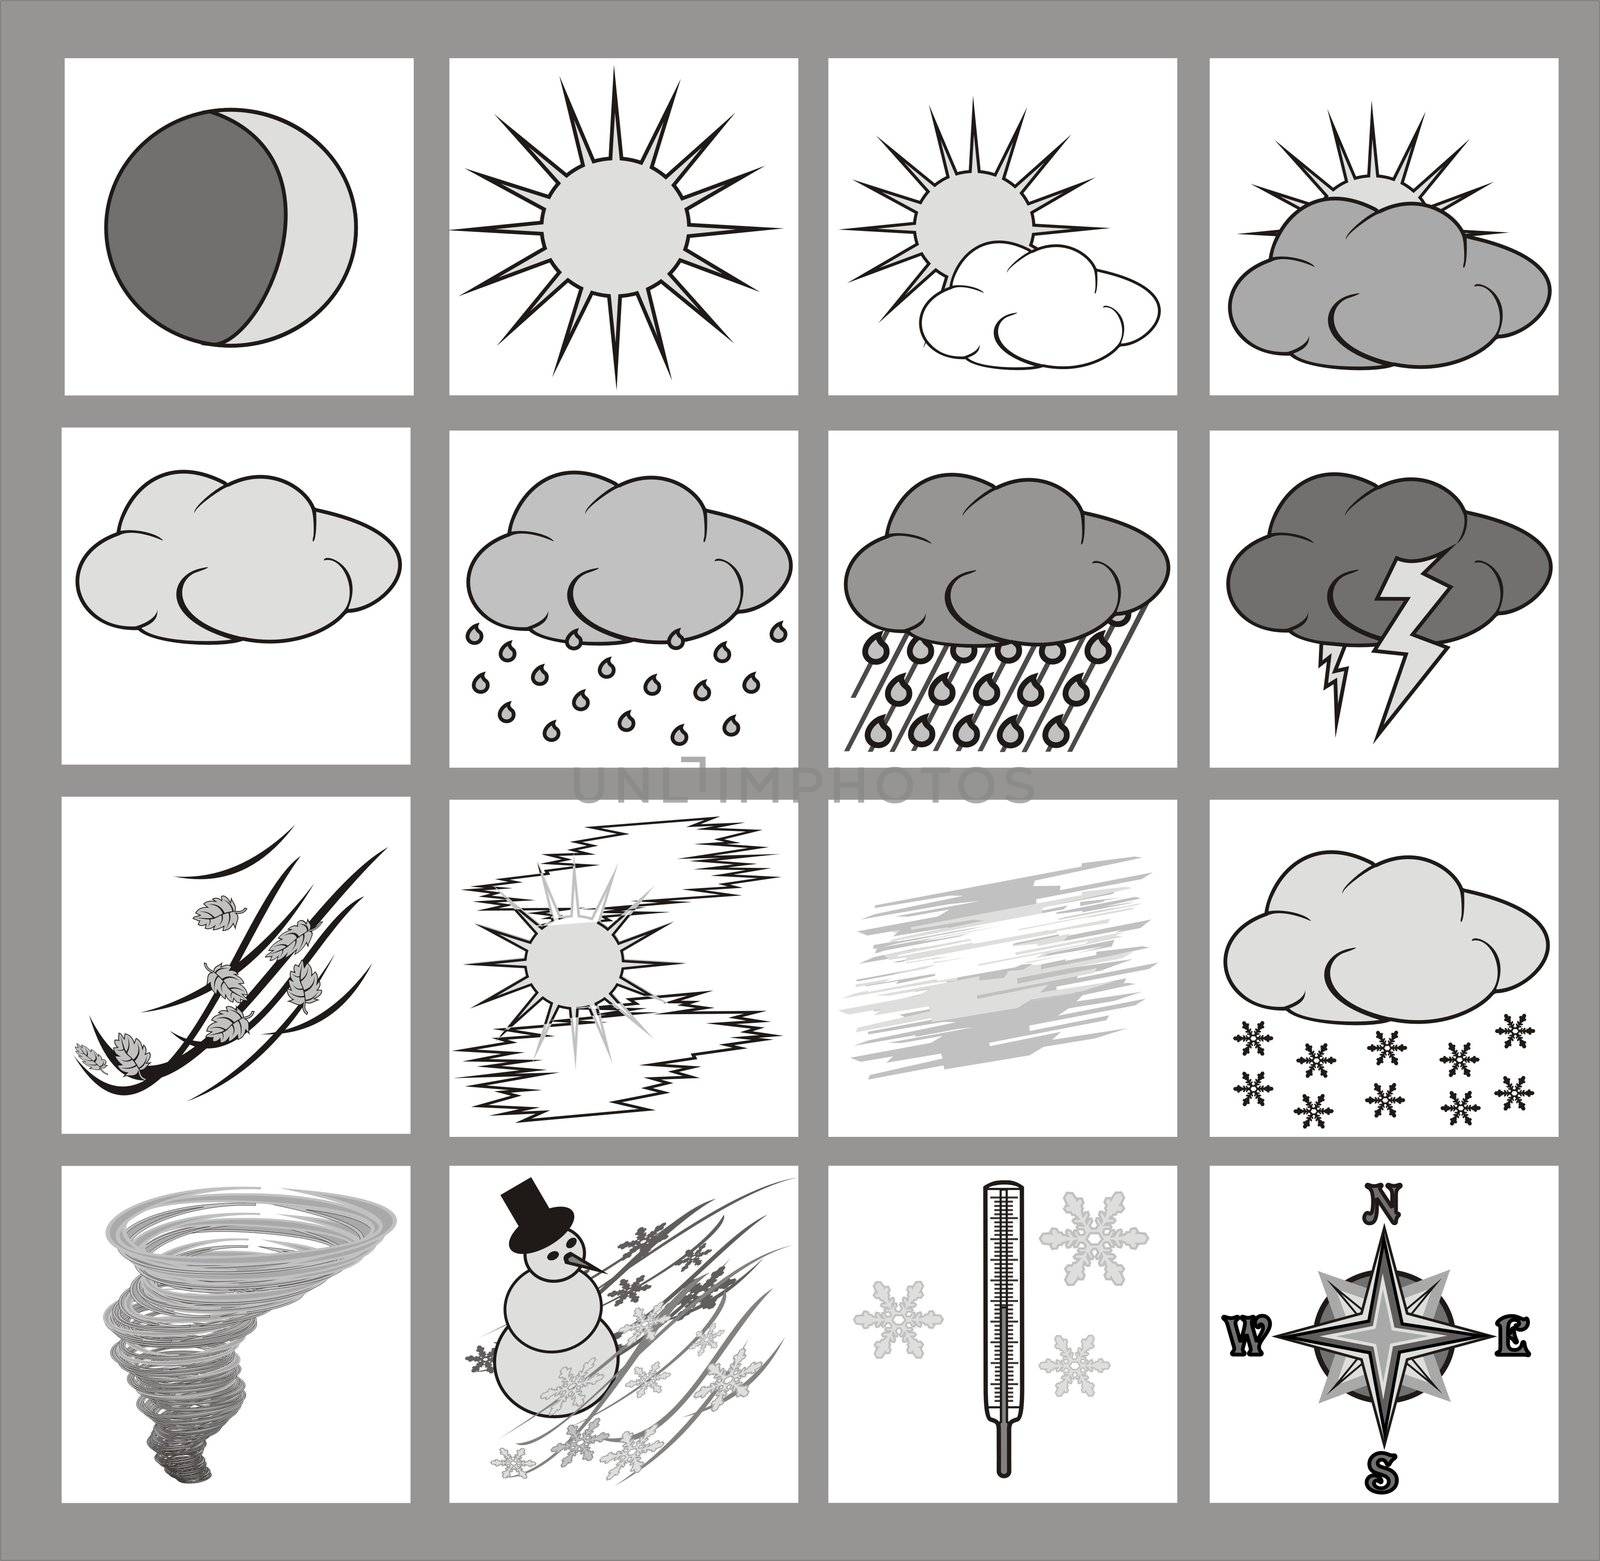 Weather icons or cliparts grayscale with black outlines on white background